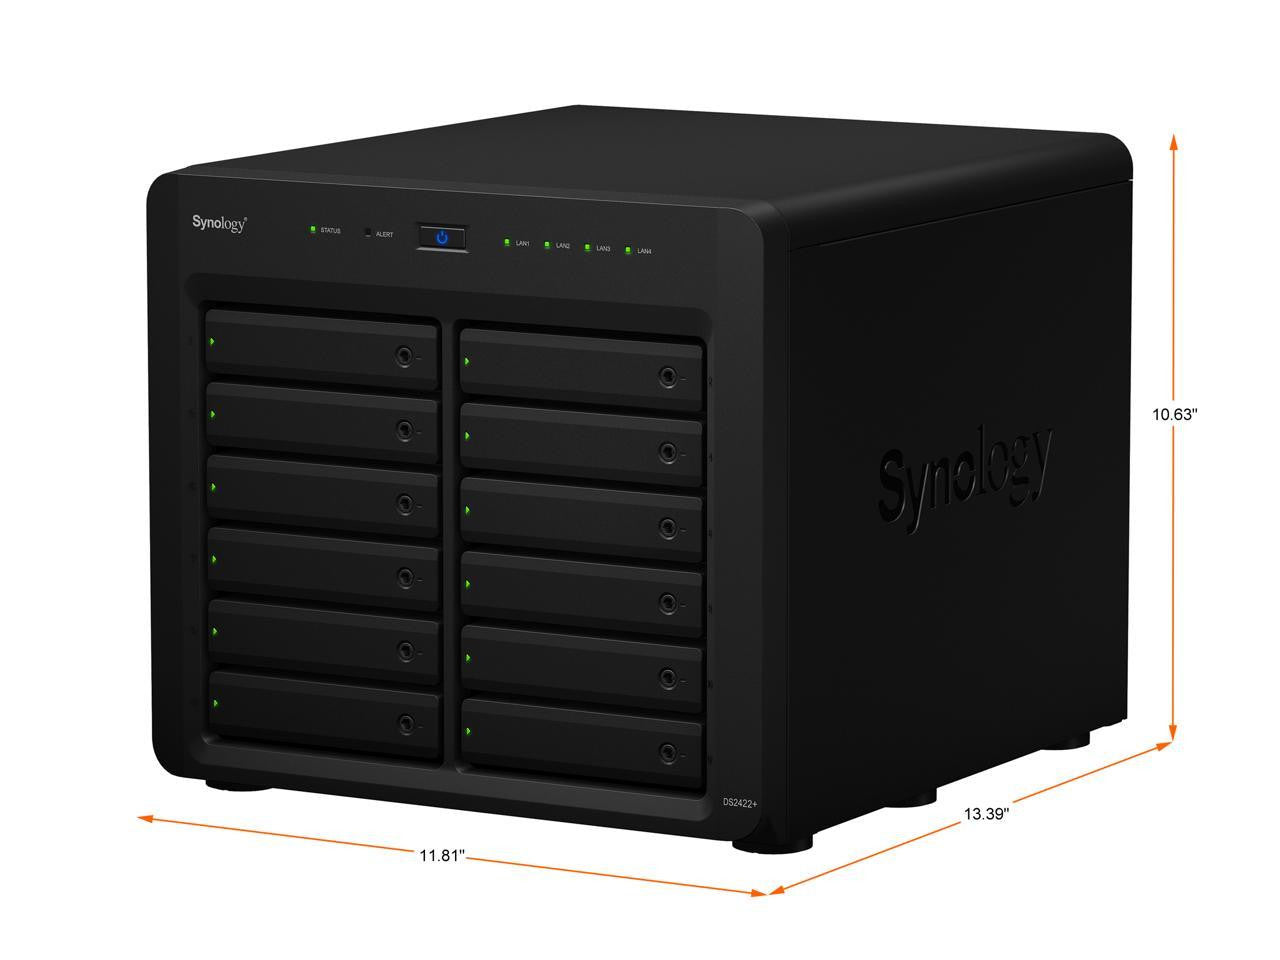 Synology DS2422+ Quad Core 2.2Ghz 12-Bay NAS with 8GB RAM and 192TB (12 x 16TB) of Synology Enterprise (HAT5300) Drives